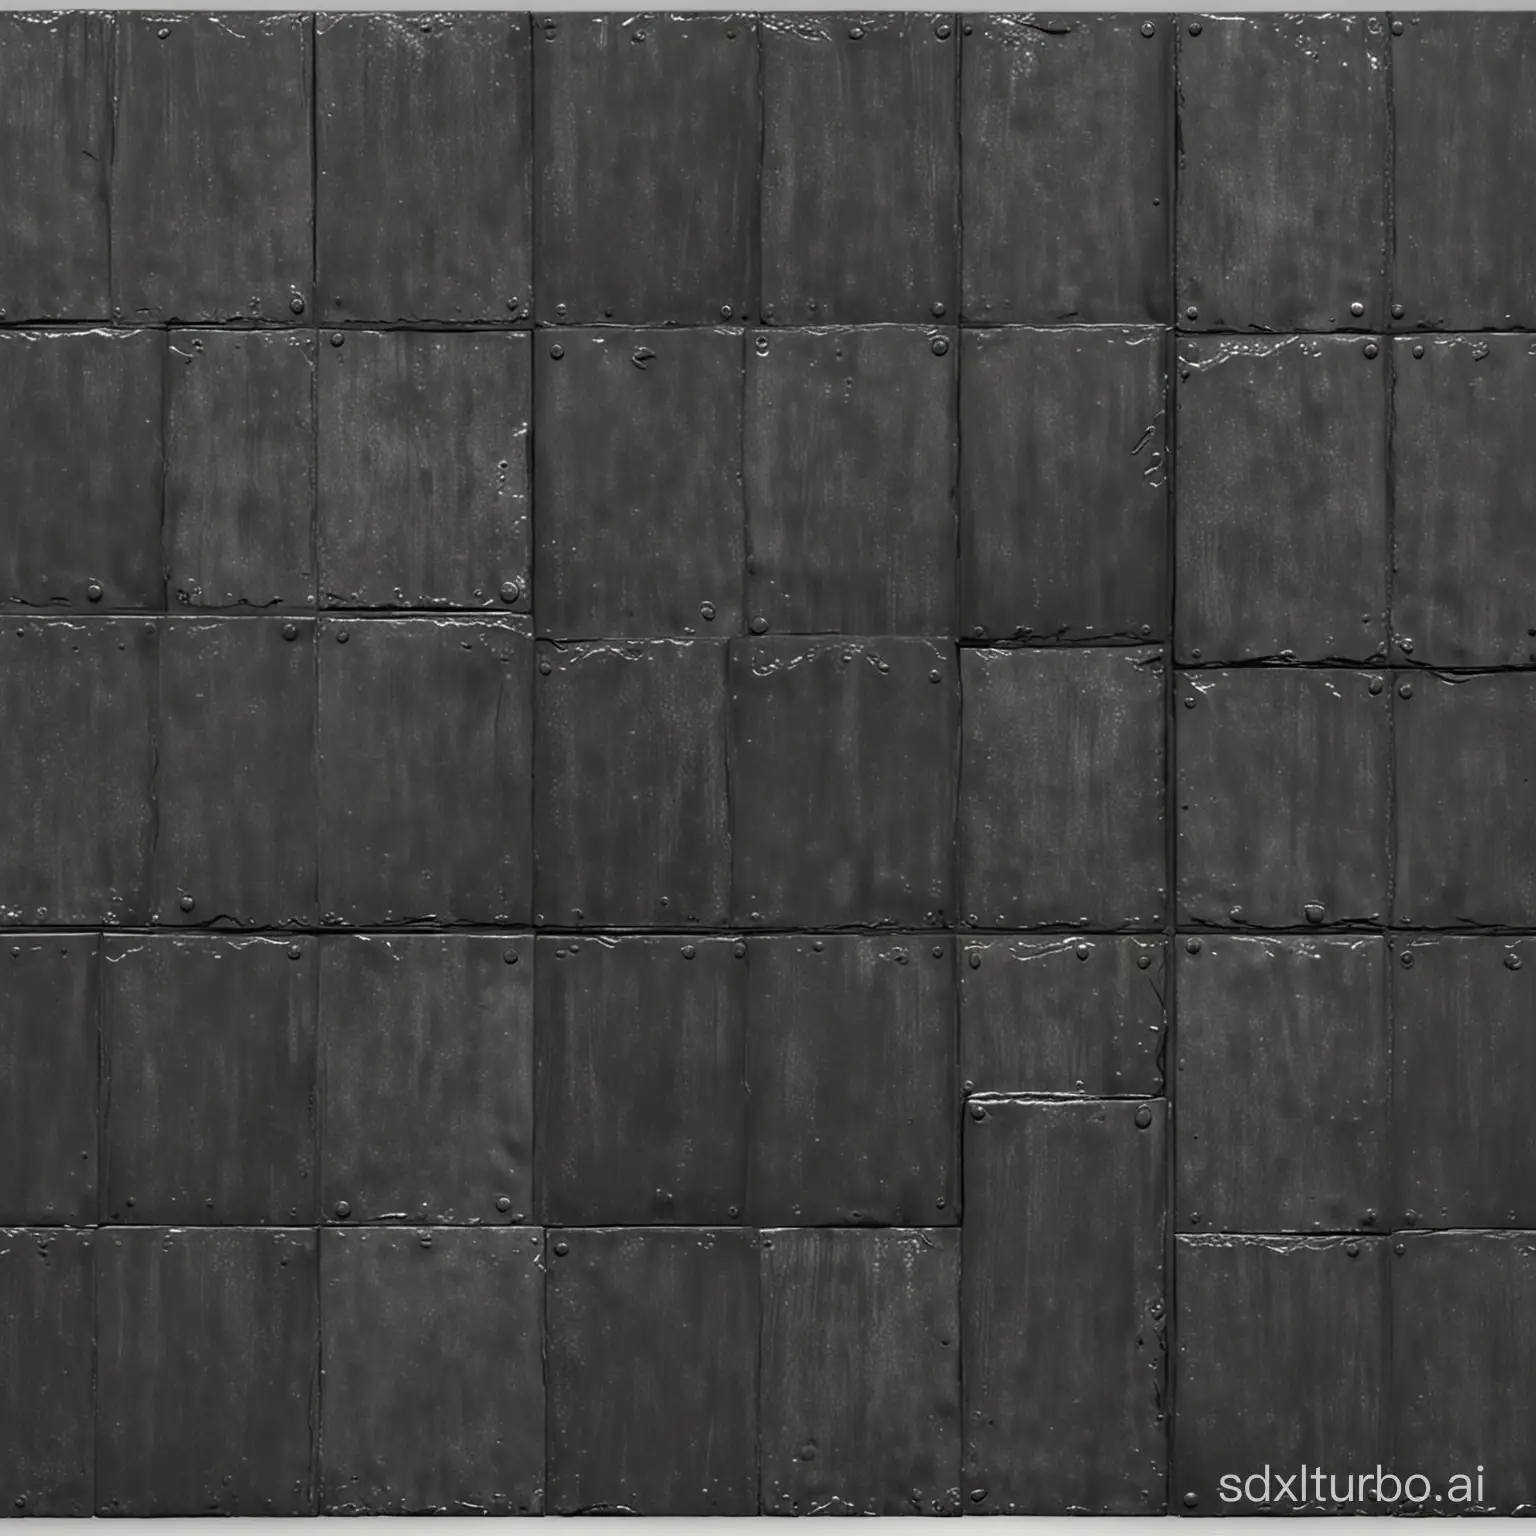 Gritty-Industrial-Metal-Plate-Texture-Assets-for-Design-Projects